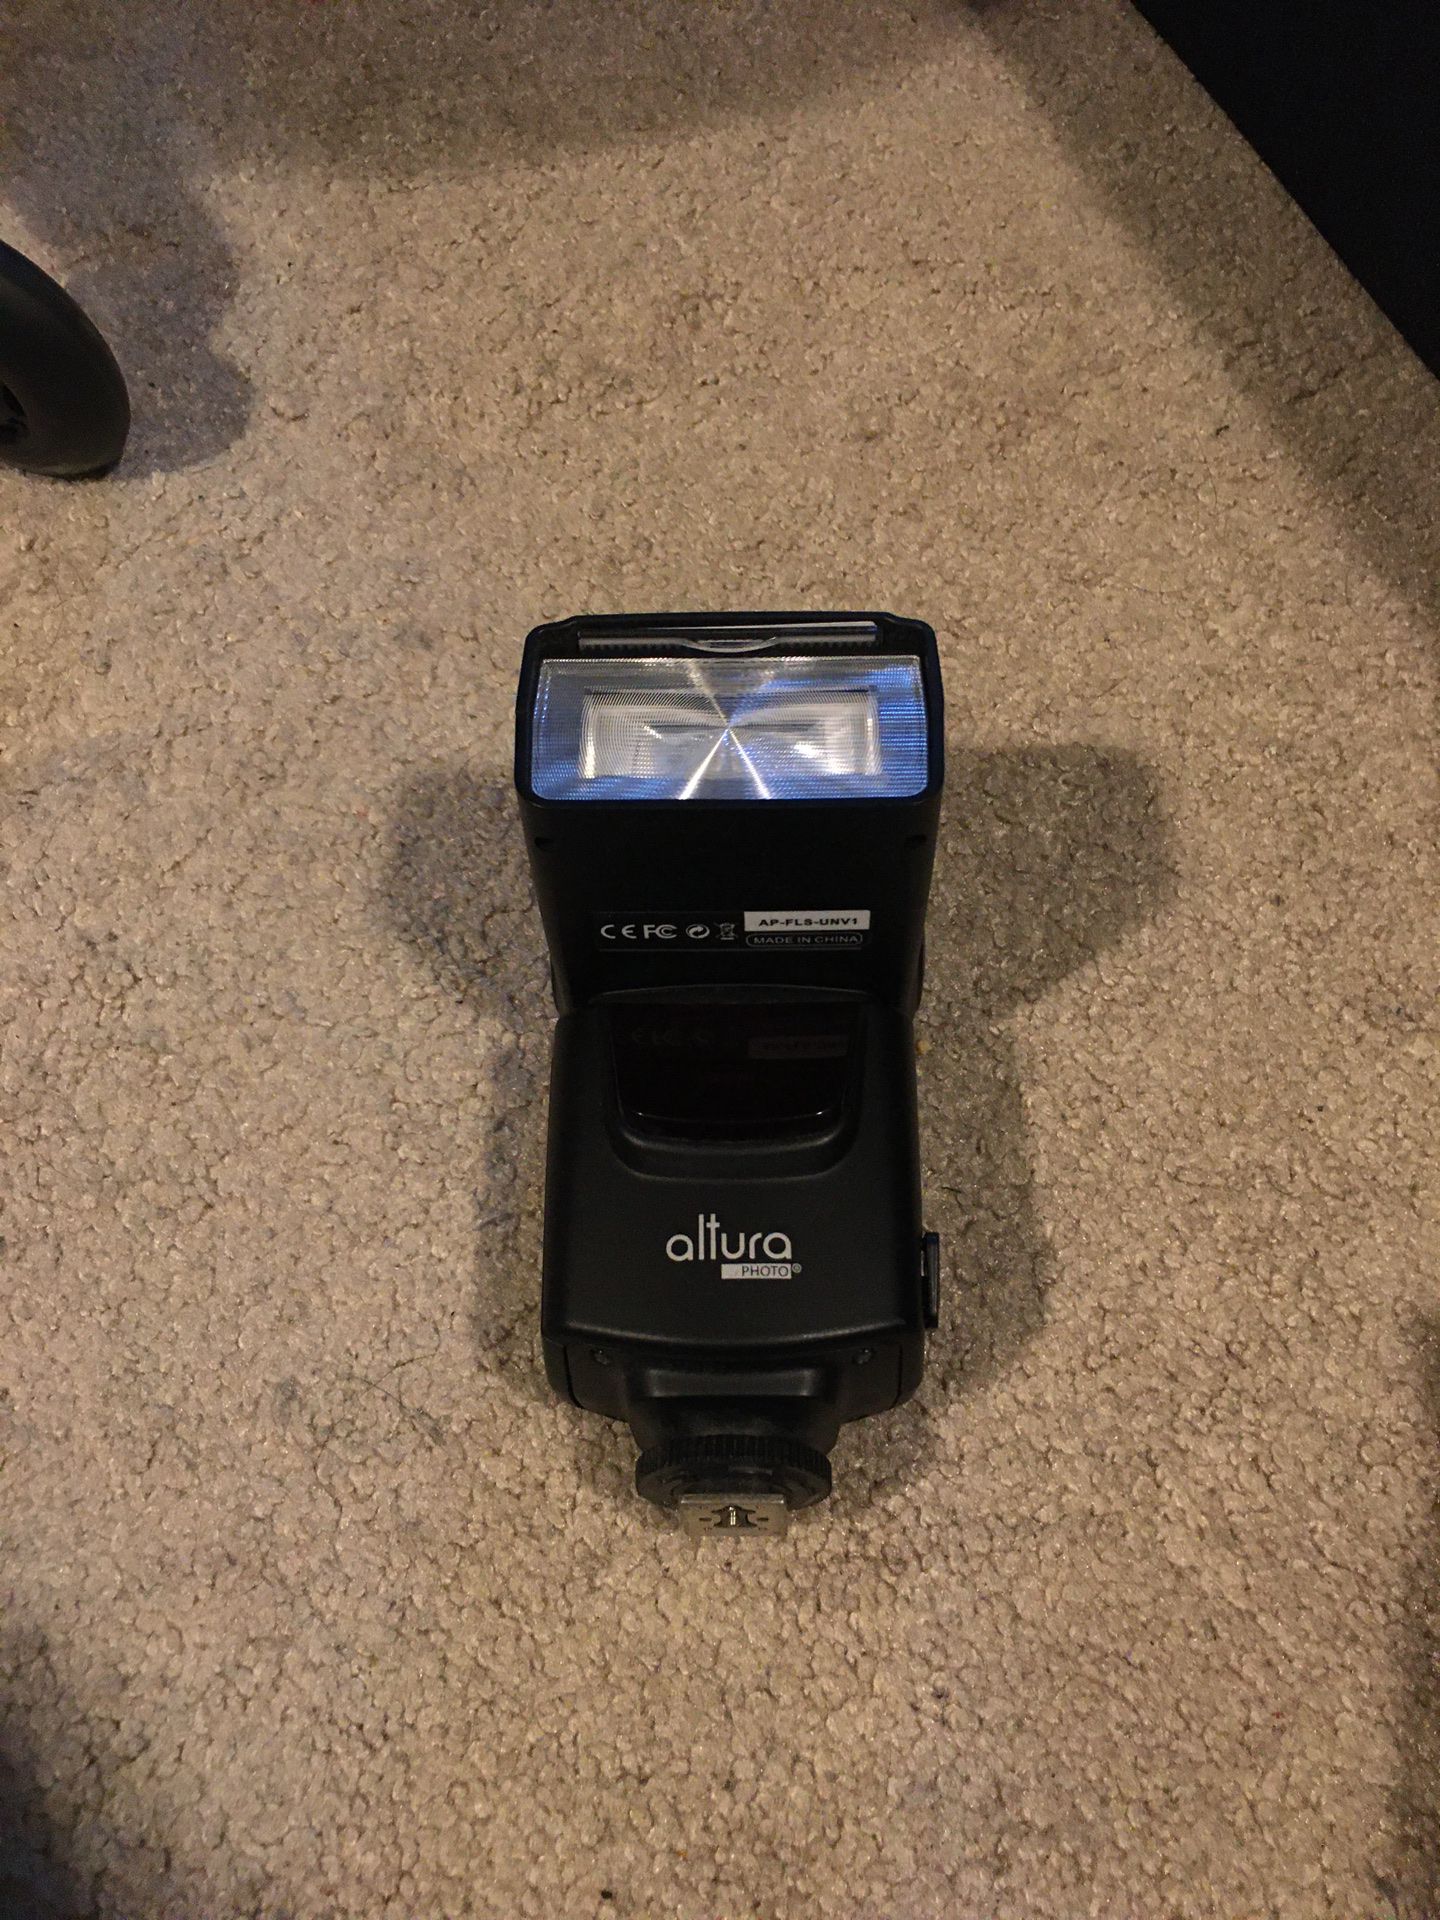 Flash attachment for digital cameras. I lost my camera so have no use for it.